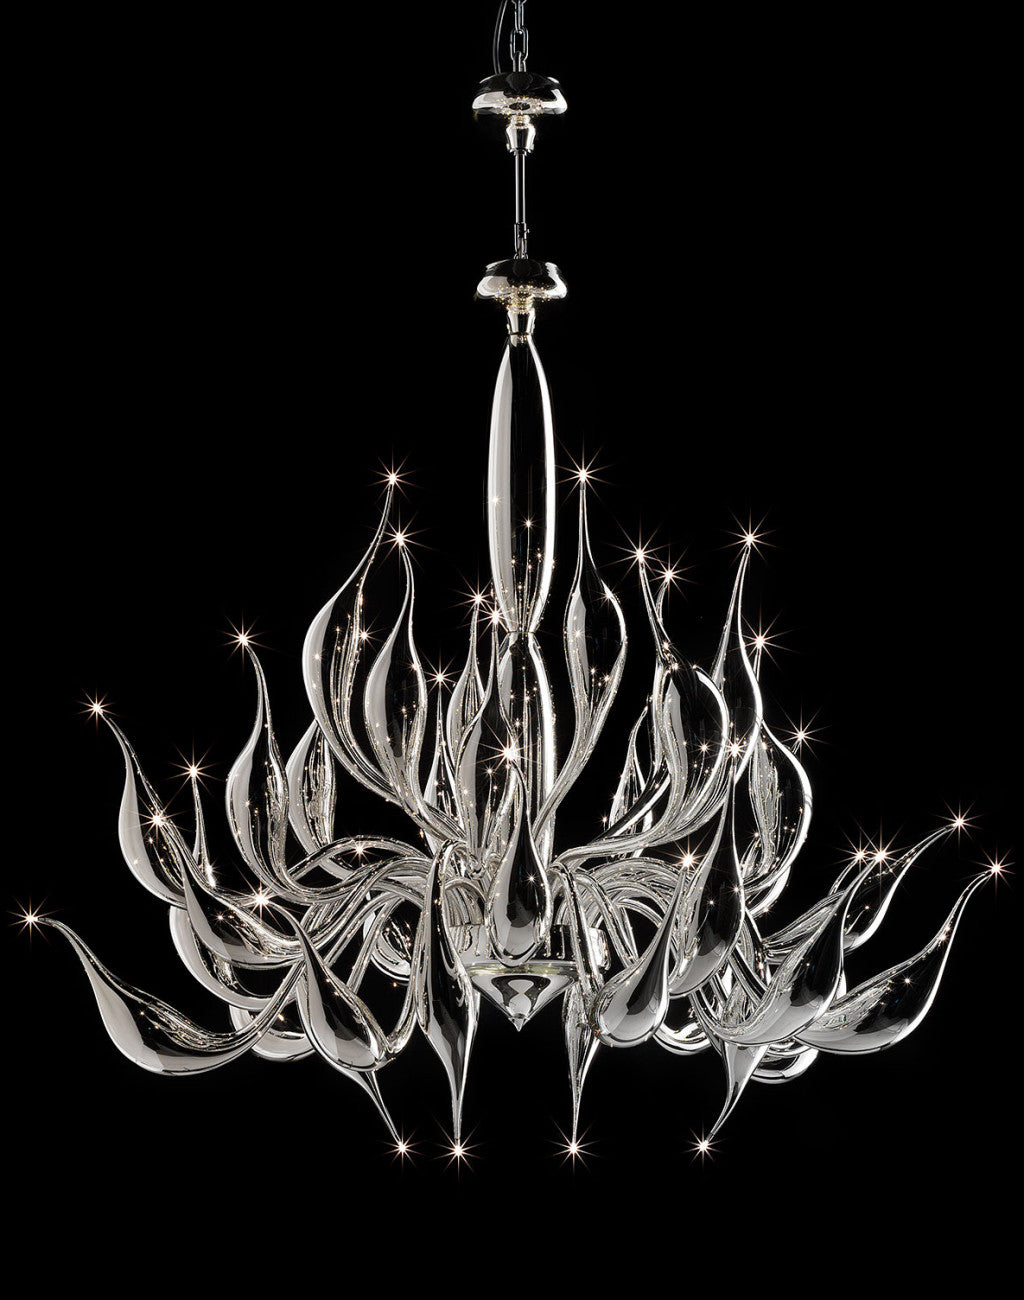 Glorious 24 light Venetian art glass chandelier with silver mirrored glass finish